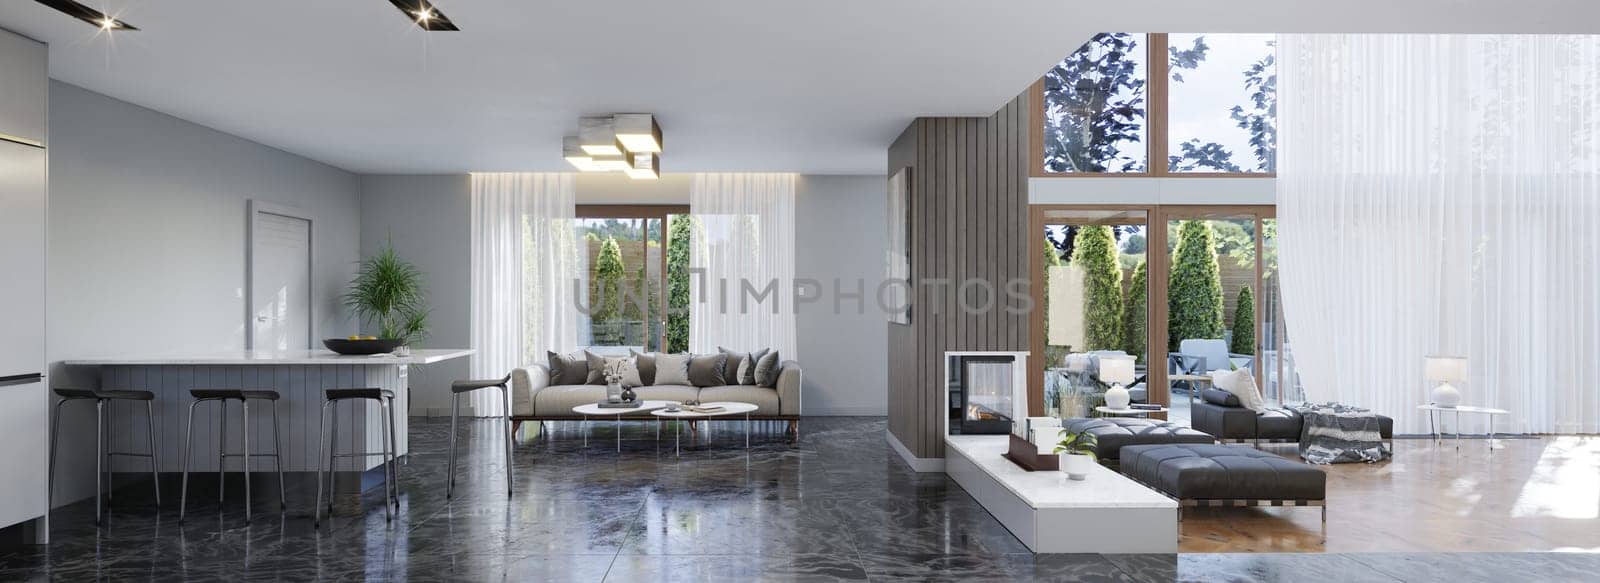 rendering of white modern living room with fireplace by vicnt